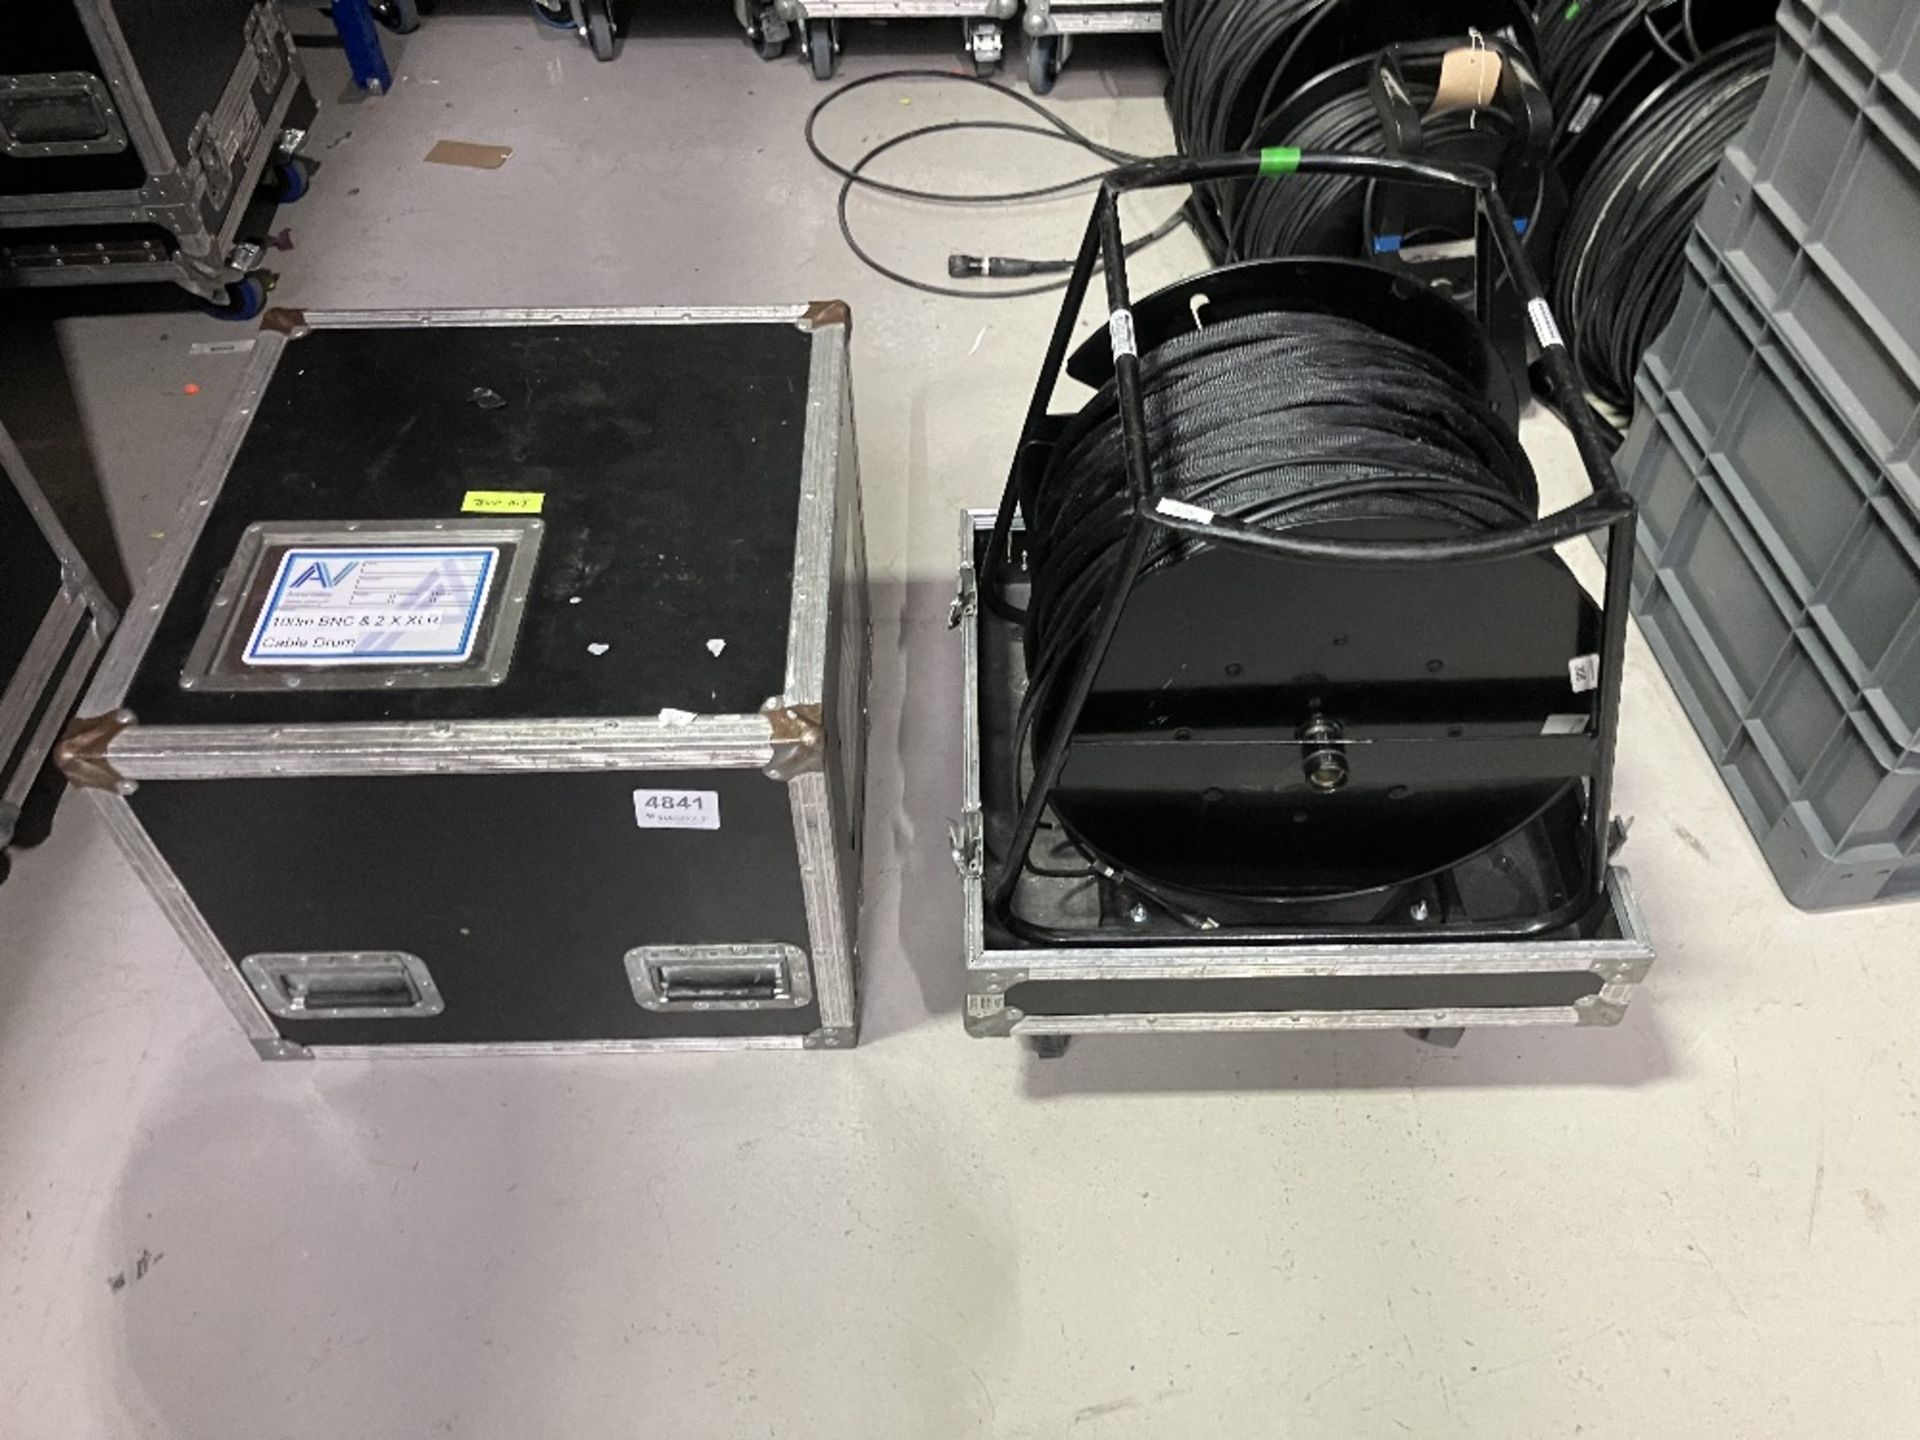 100m Bnc & (2) XLR Cables With Heavy Duty Mobile Flight Case - Image 3 of 11